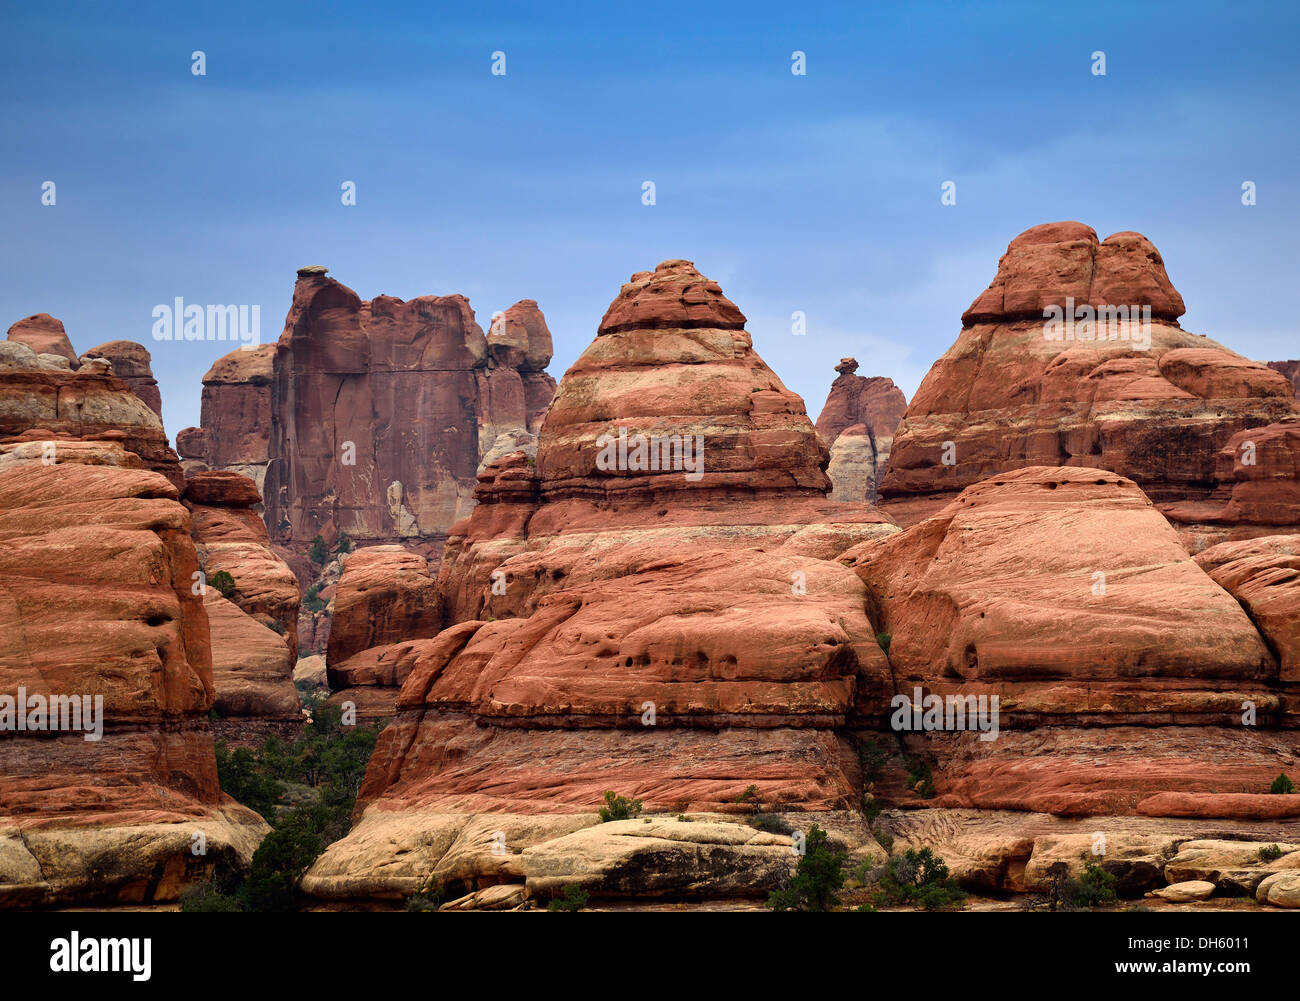 Pinnacles at Elephant Hill District, The Needles District, Canyonlands National Park, Utah, United States of America, USA Stock Photo